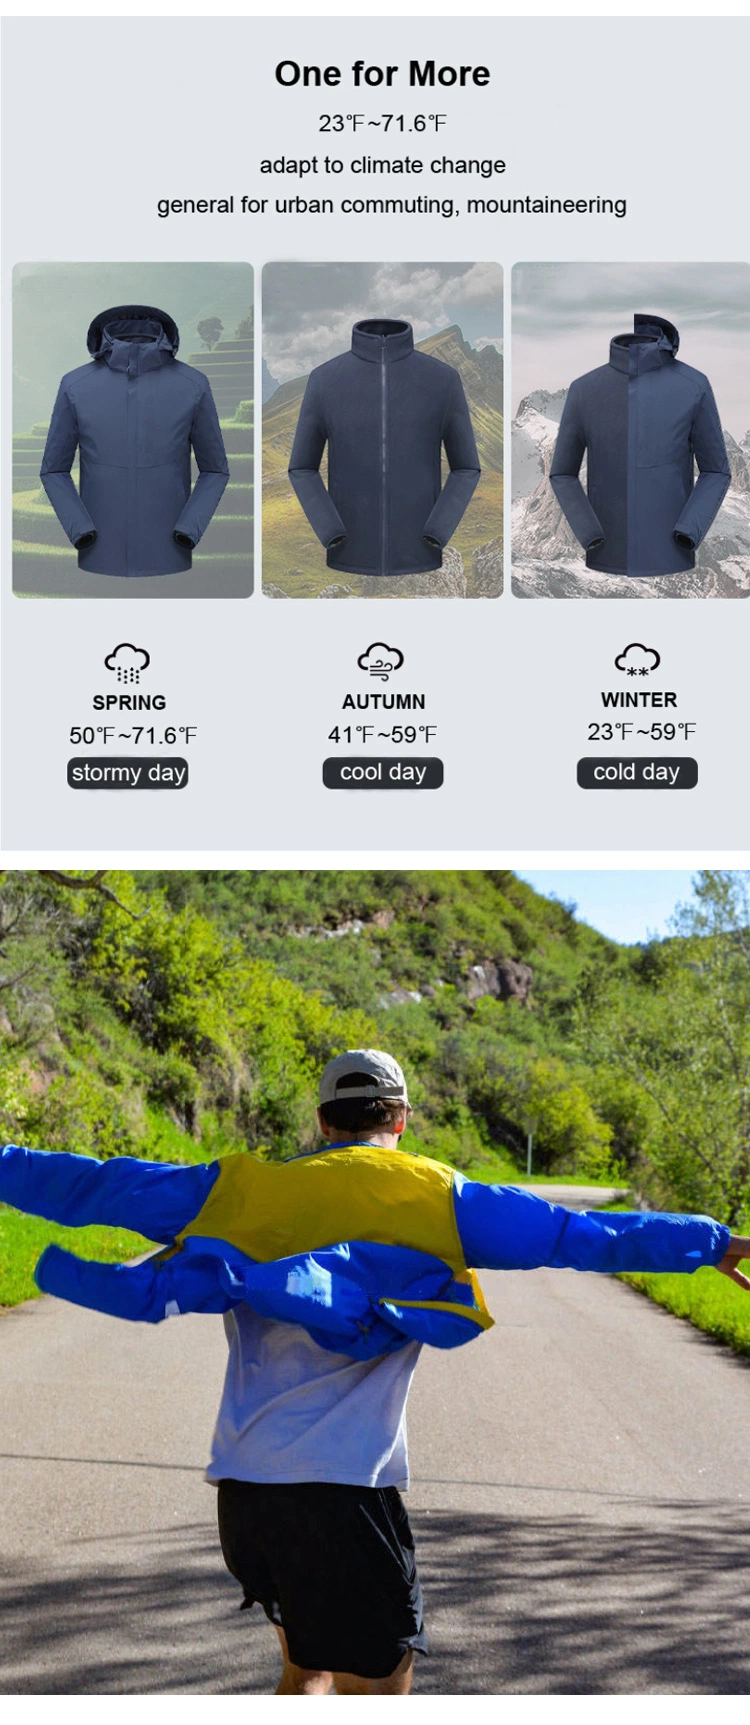 Wholesale Factory Functional Waterproof Oil-Proof Anti-Fouling Hooded Jacket Outdoor Jacket for Men and Women